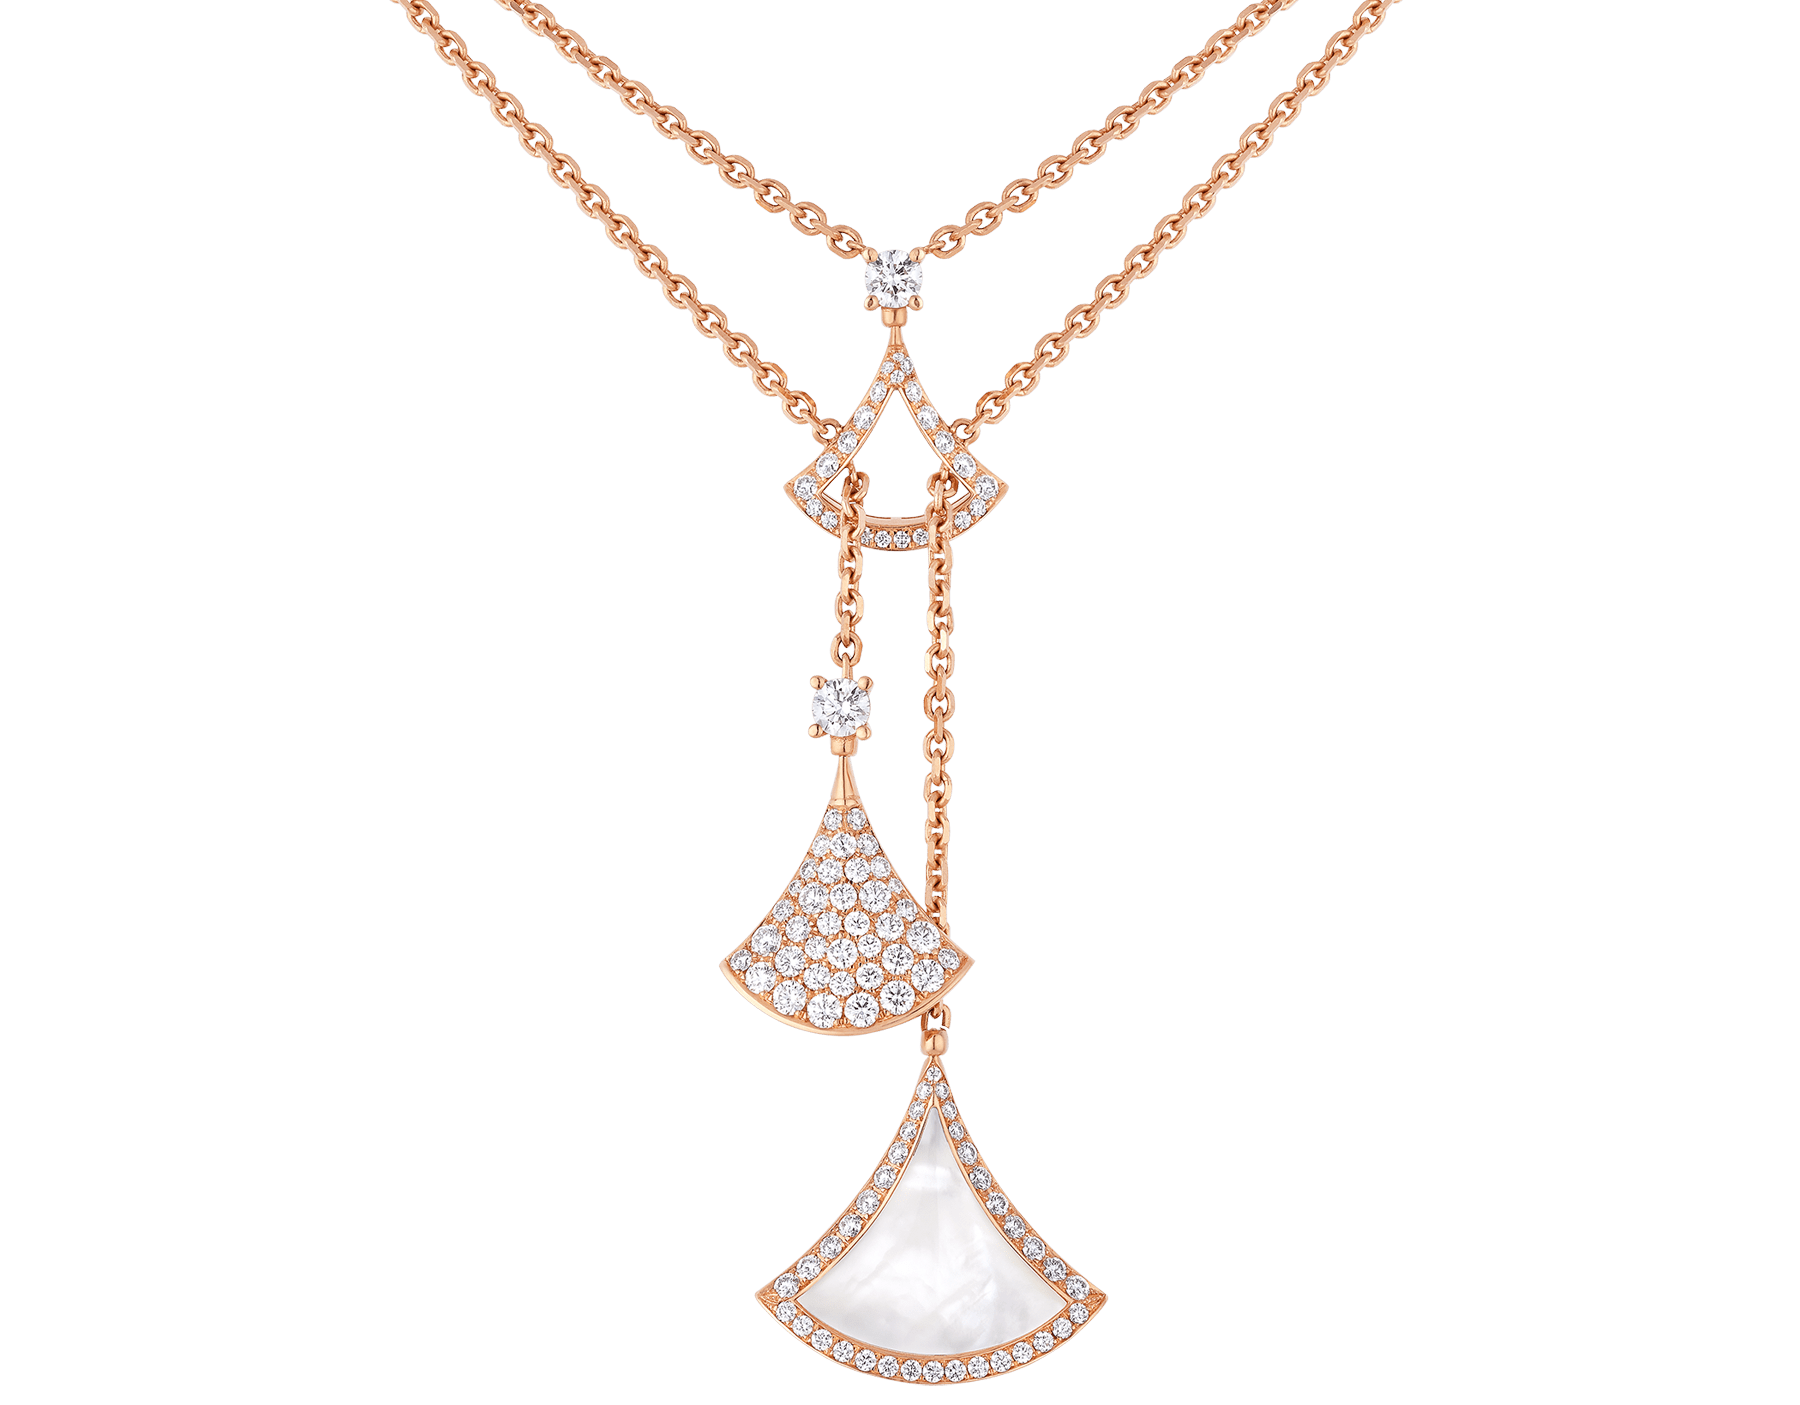 DIVAS' DREAM necklace in 18 kt rose gold with three fan-shaped motifs set with a mother-of-pearl insert and pavé diamonds 358682 image 1